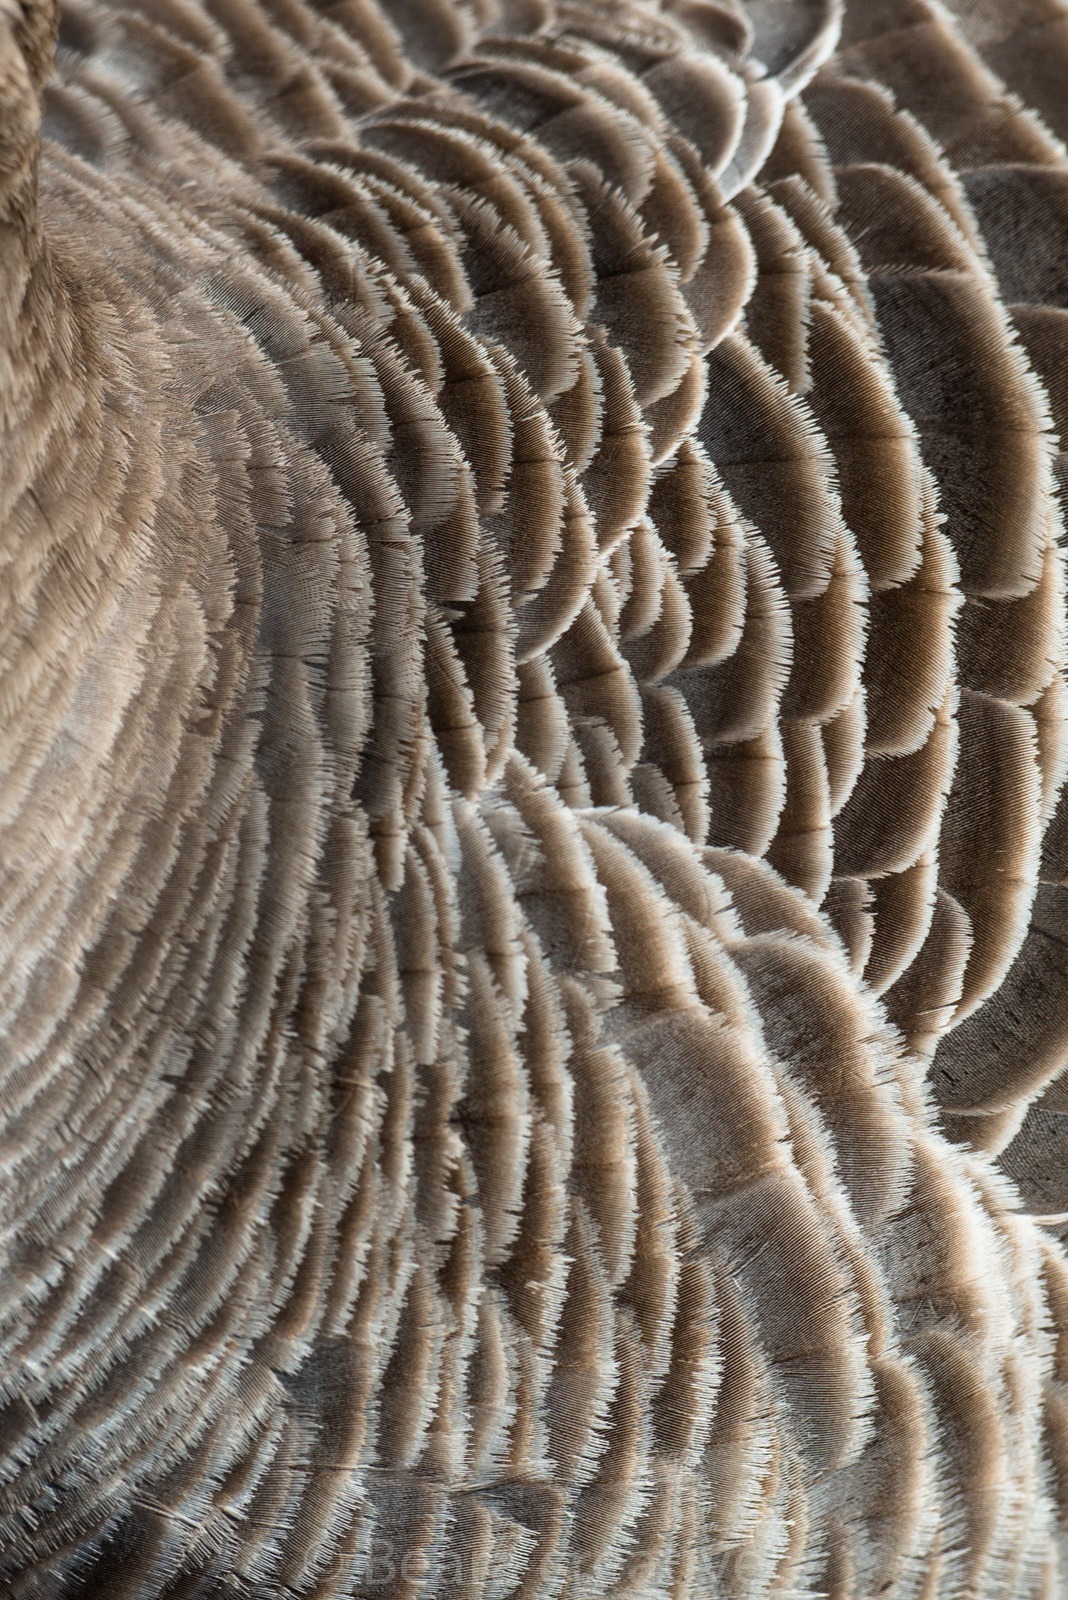 Greylag goose feathers detailed texture